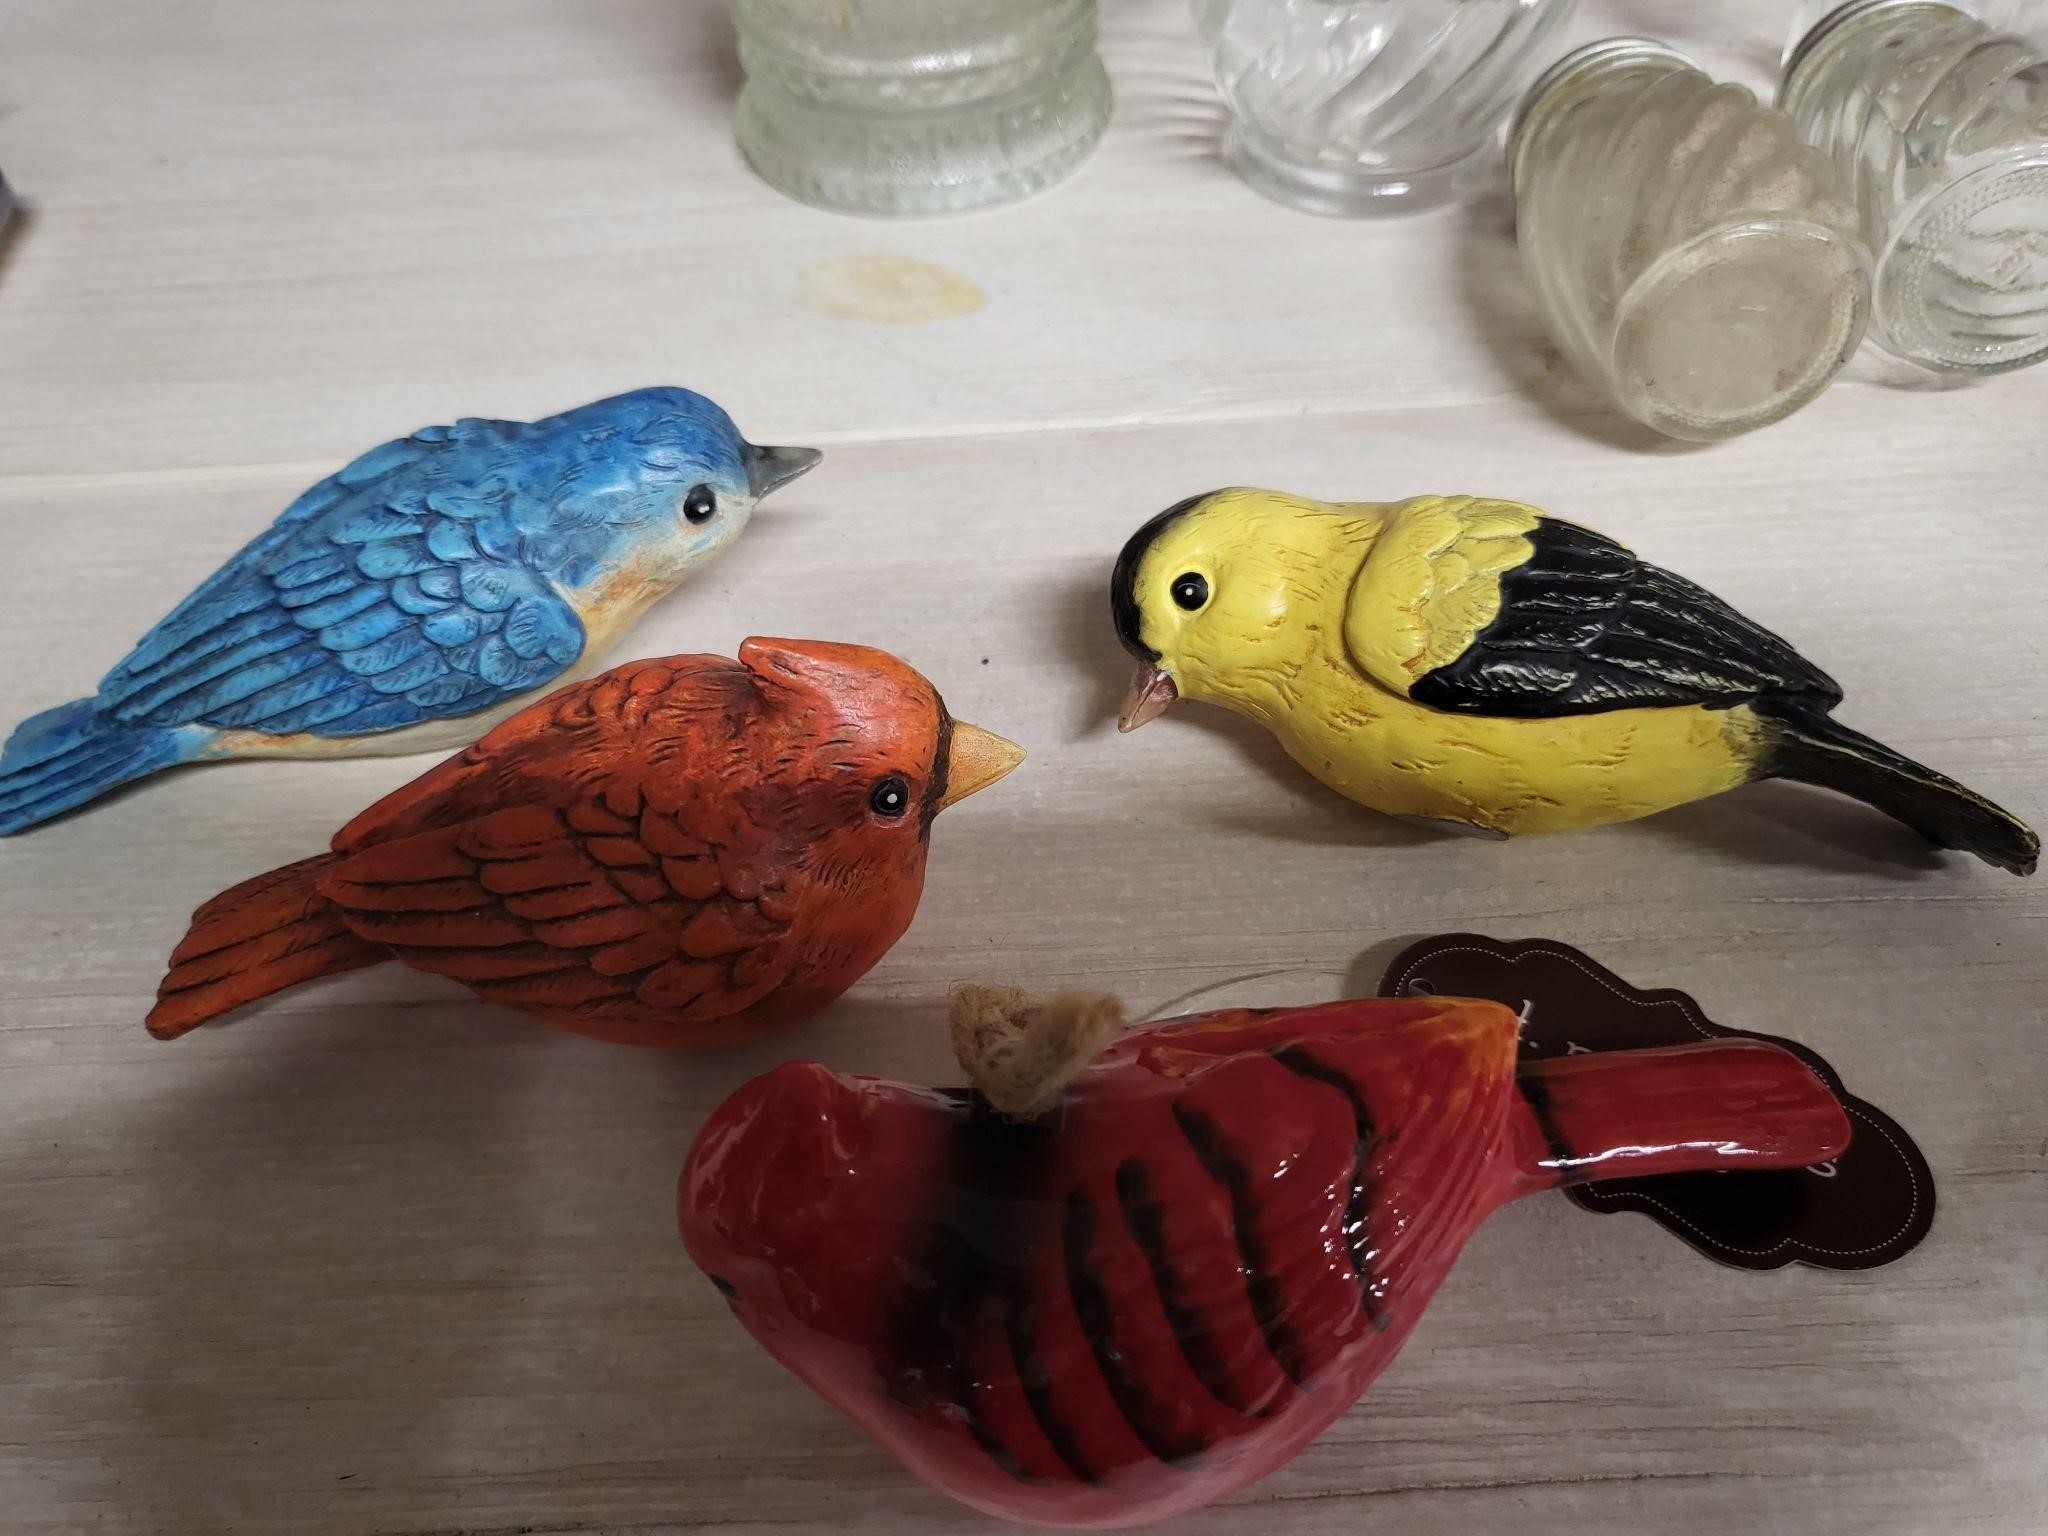 Lot of decorative birds 3 are magnets